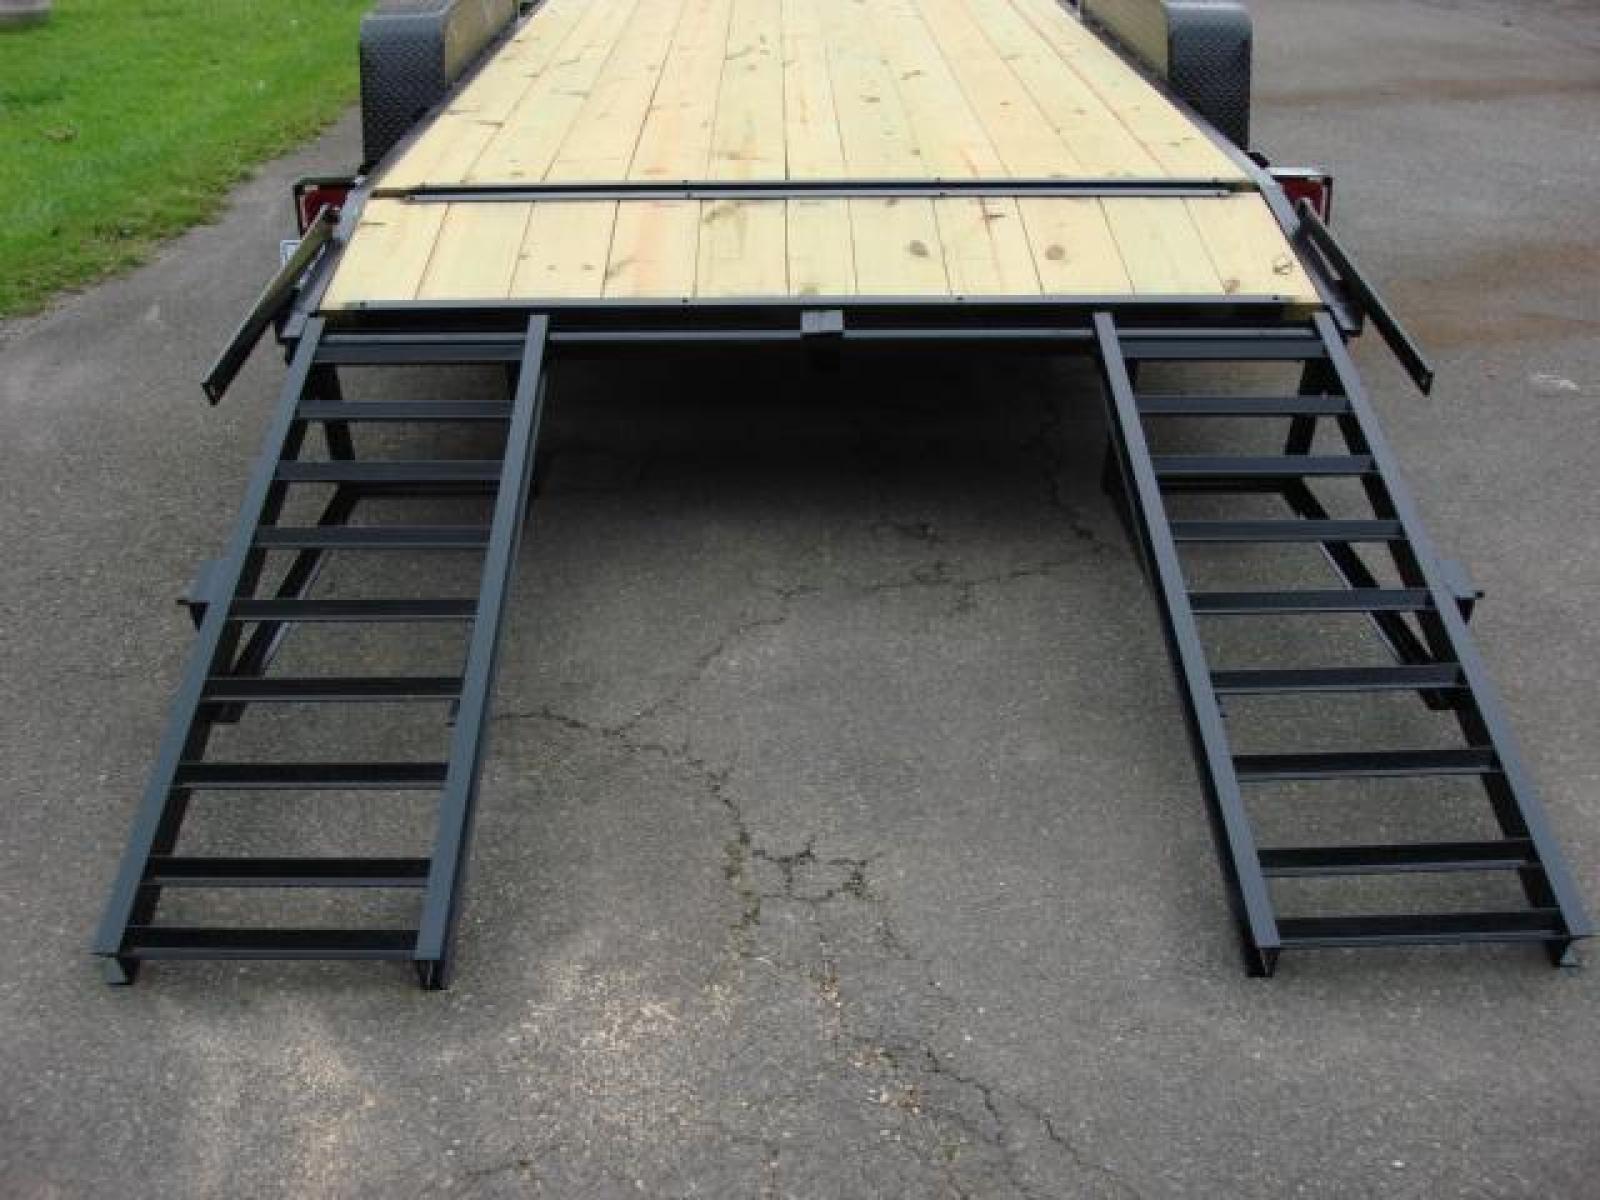 2022 Black Macon Custom Flatbed & Equipment , located at 1330 Rainey Rd., Macon, 31220, (478) 960-1044, 32.845638, -83.778687 - Hurry Close Out Priced to Sell! Brand New 7ft X 20ft Long, Including the Beaver Tail Flatbed Equipment Trailer. 3.5 Ton Heavy Duty Tractor, Equipment or Car Hauling Trailer. 6" Channel Iron Main frame! Most Companies Use a 5" Channel Iron Frame! Diamond Plate Steel Fenders are Heavy Duty! - Photo #11